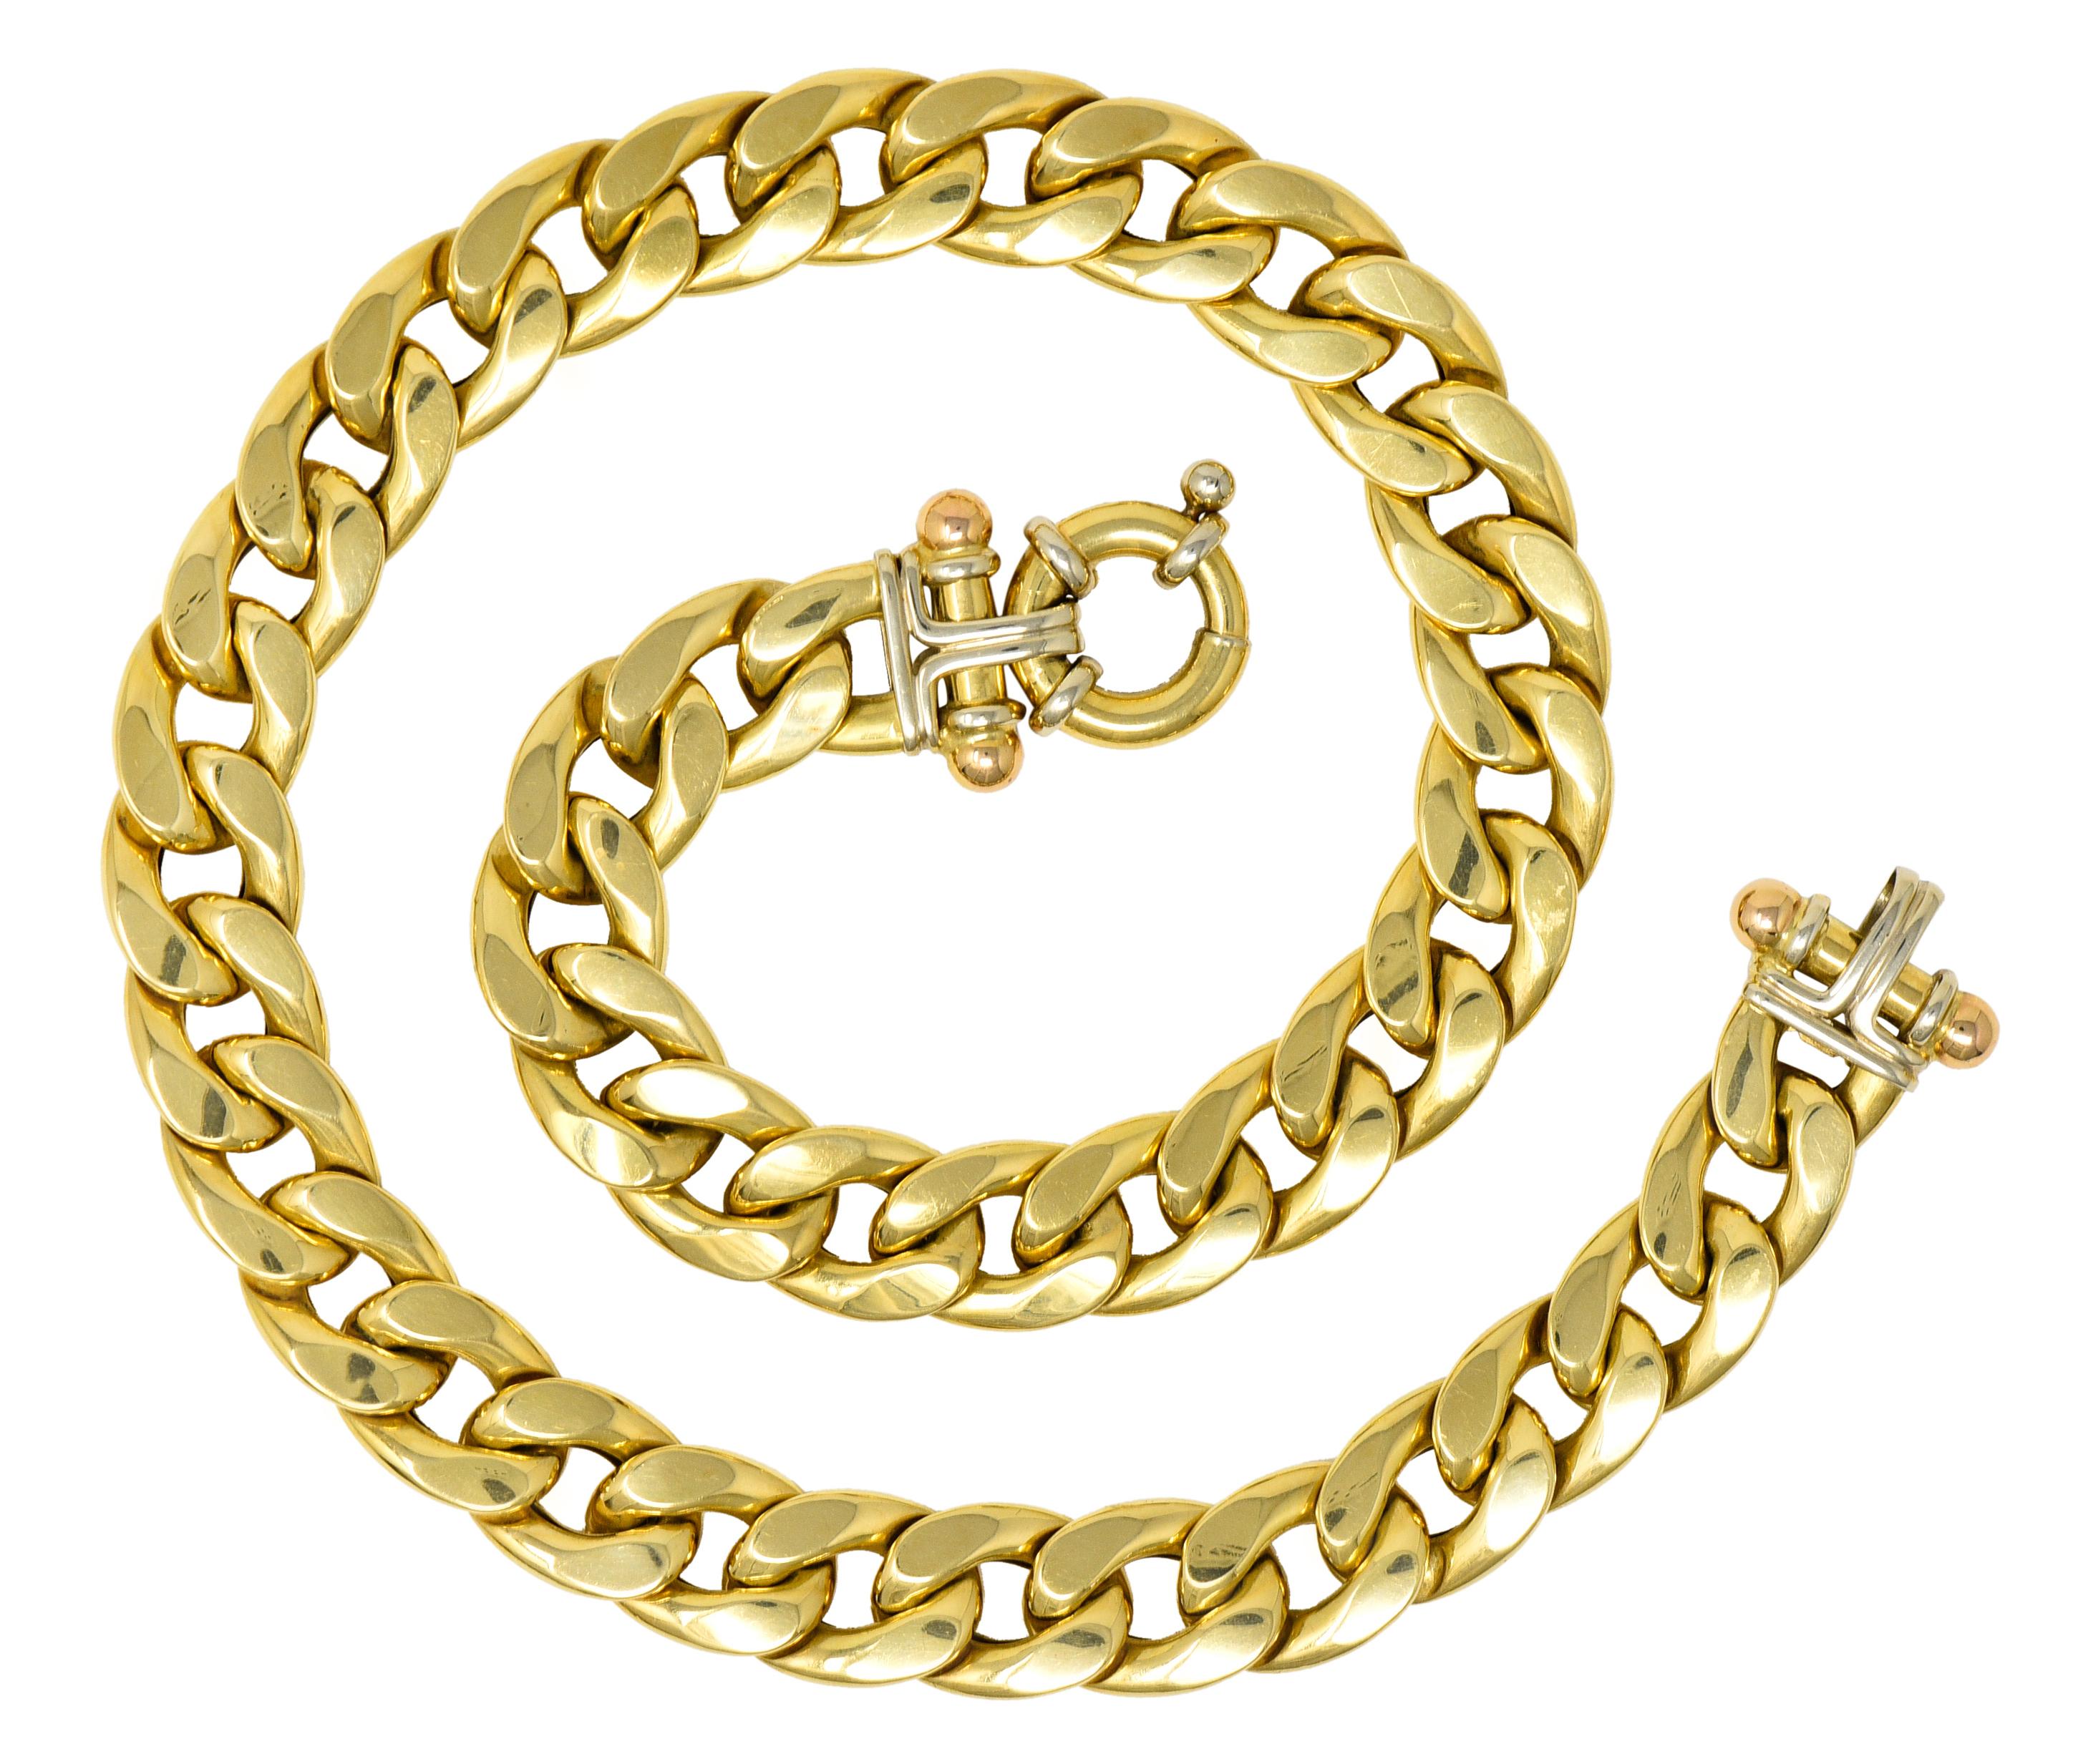 Necklace is designed as a large curb link chain

With ridged white gold and rose gold terminals

Completed by spring clasp closure

Stamped 750 for 18 karat tri-colored gold

Stamped with assay marks for Arezzo, Italy

Circa: 1980's

Length: 17 1/2